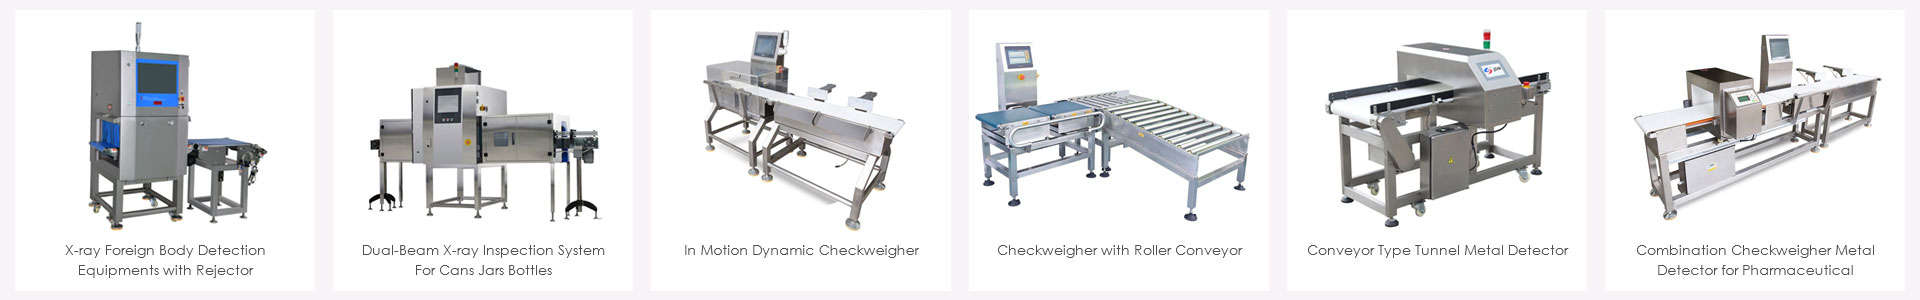 China Check Weigher - Checkweigher Solutions